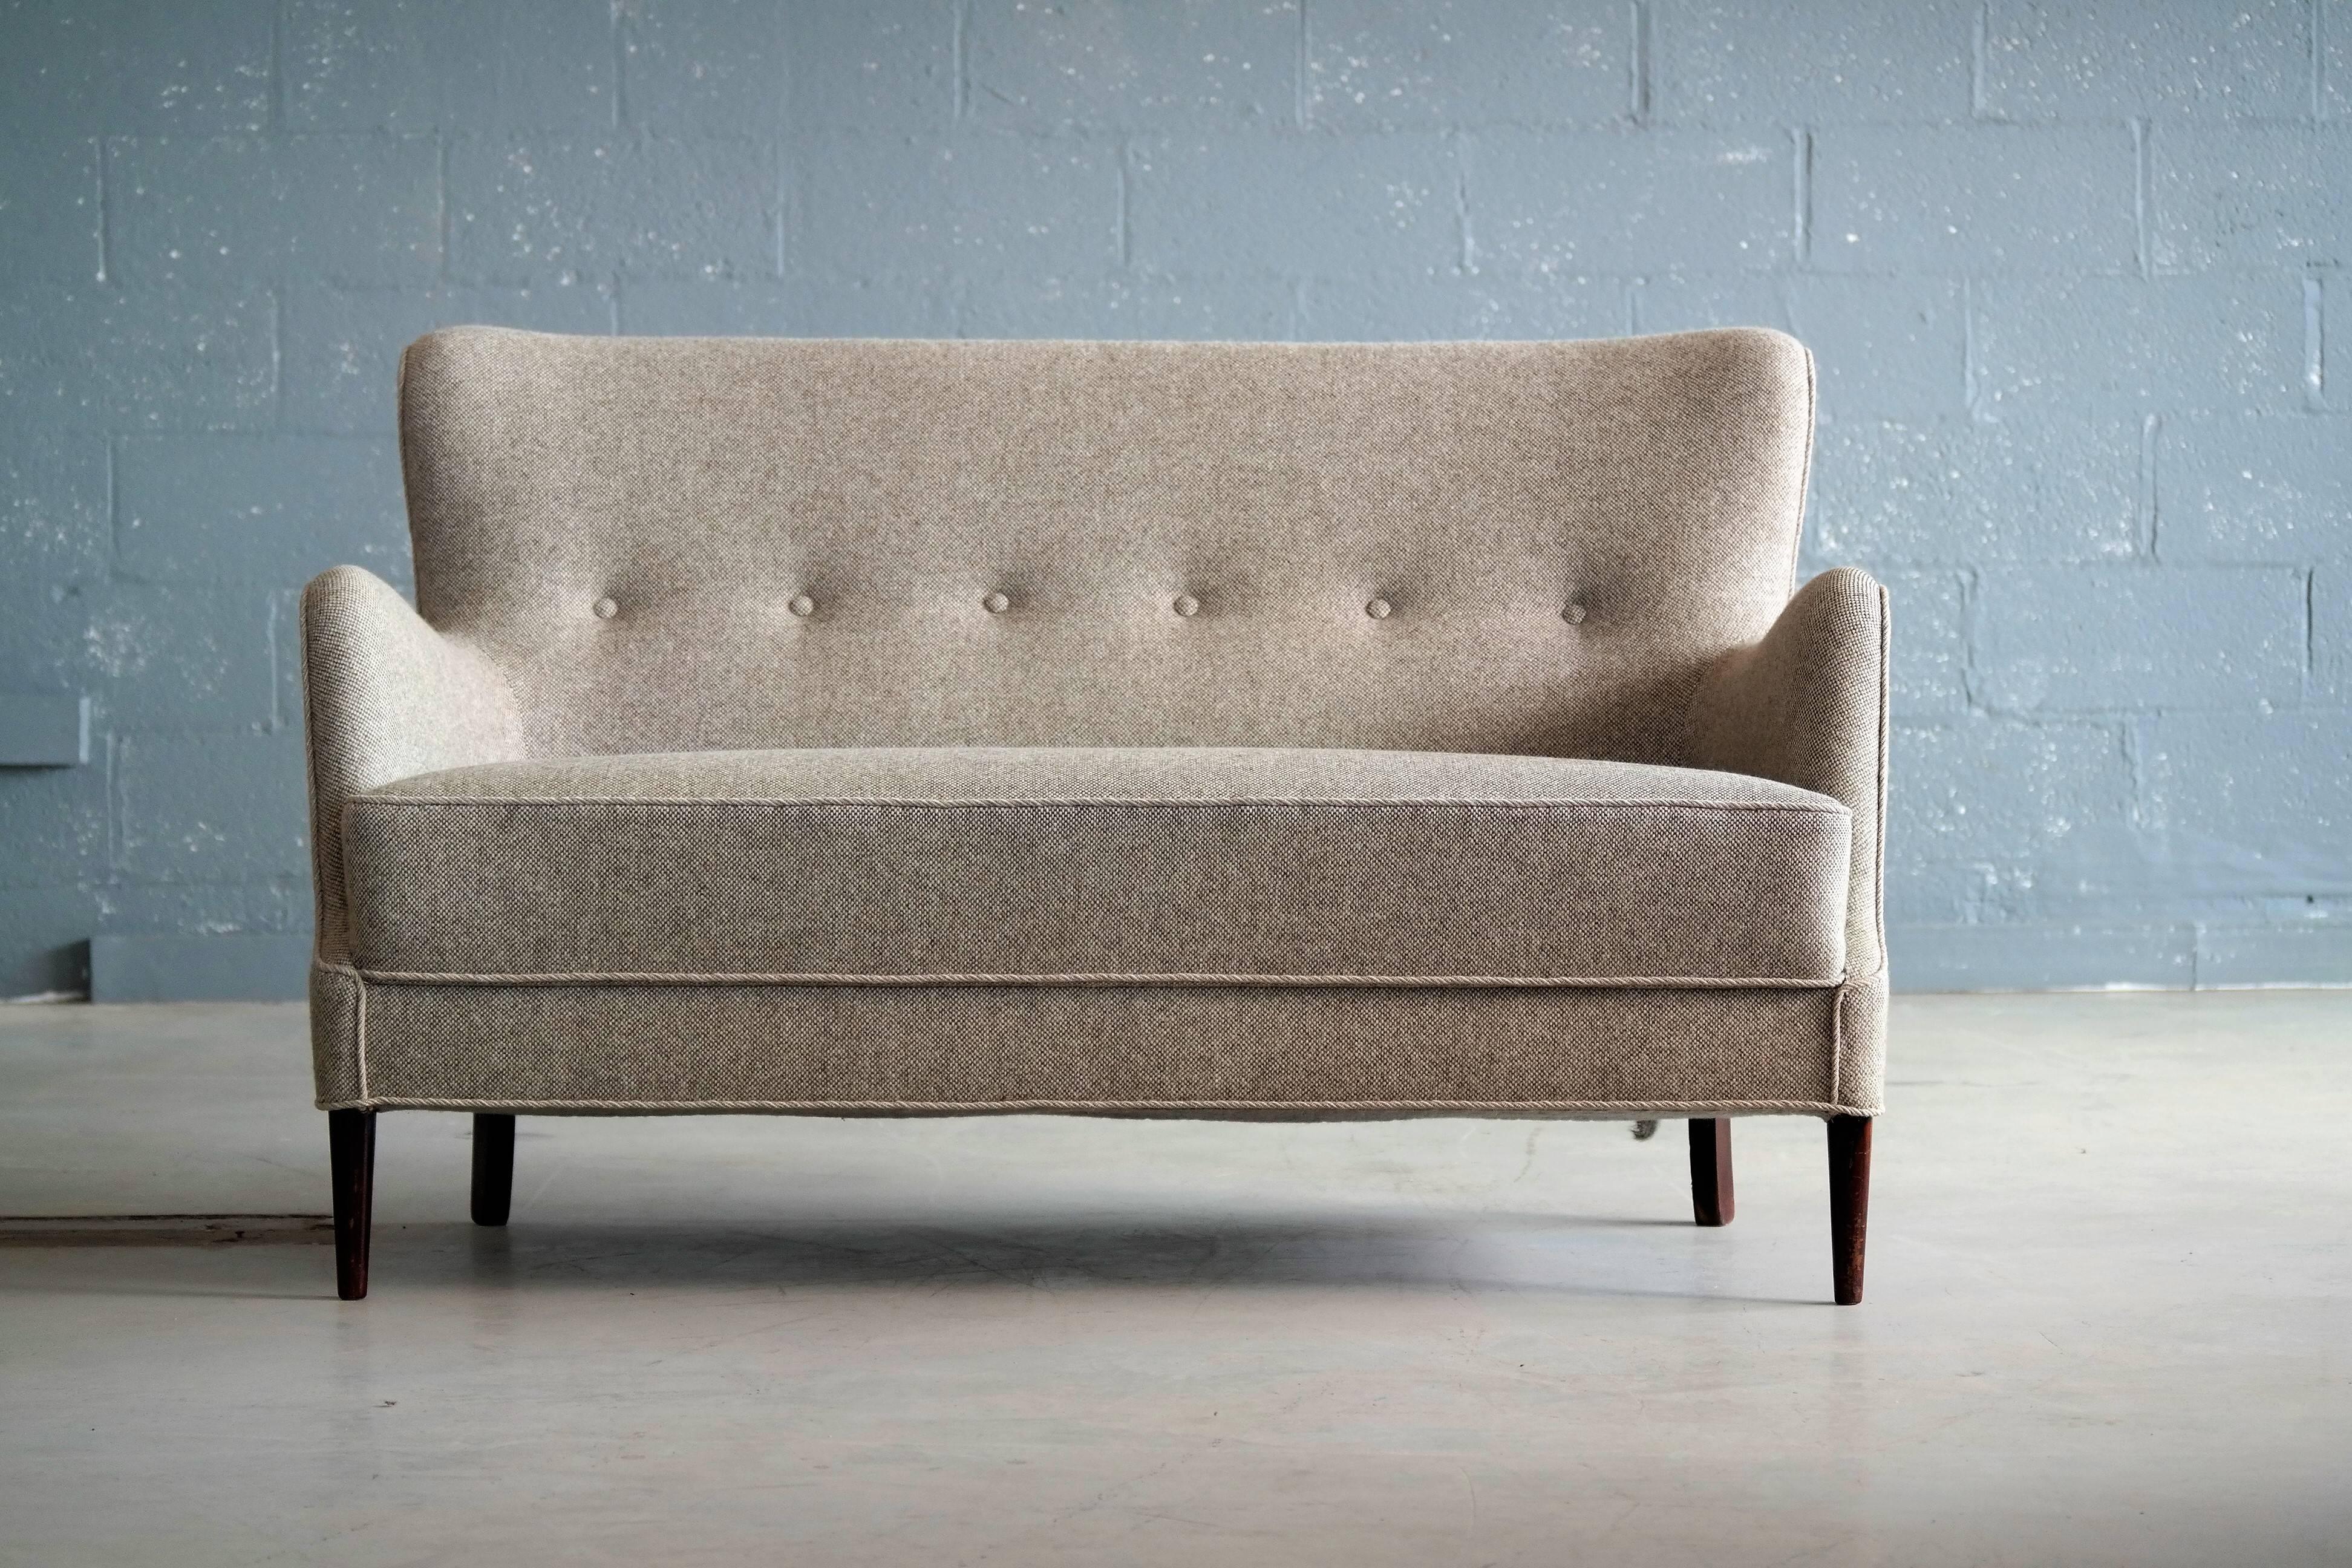 Elegant Danish or Swedish settee or loveseat from circa 1950s in the style of Carl Malmsten. Recently re-upholstered in a nice gray soft wool fabric. Sturdy and in overall excellent condition.

The sofa has clear design cues from both Frits